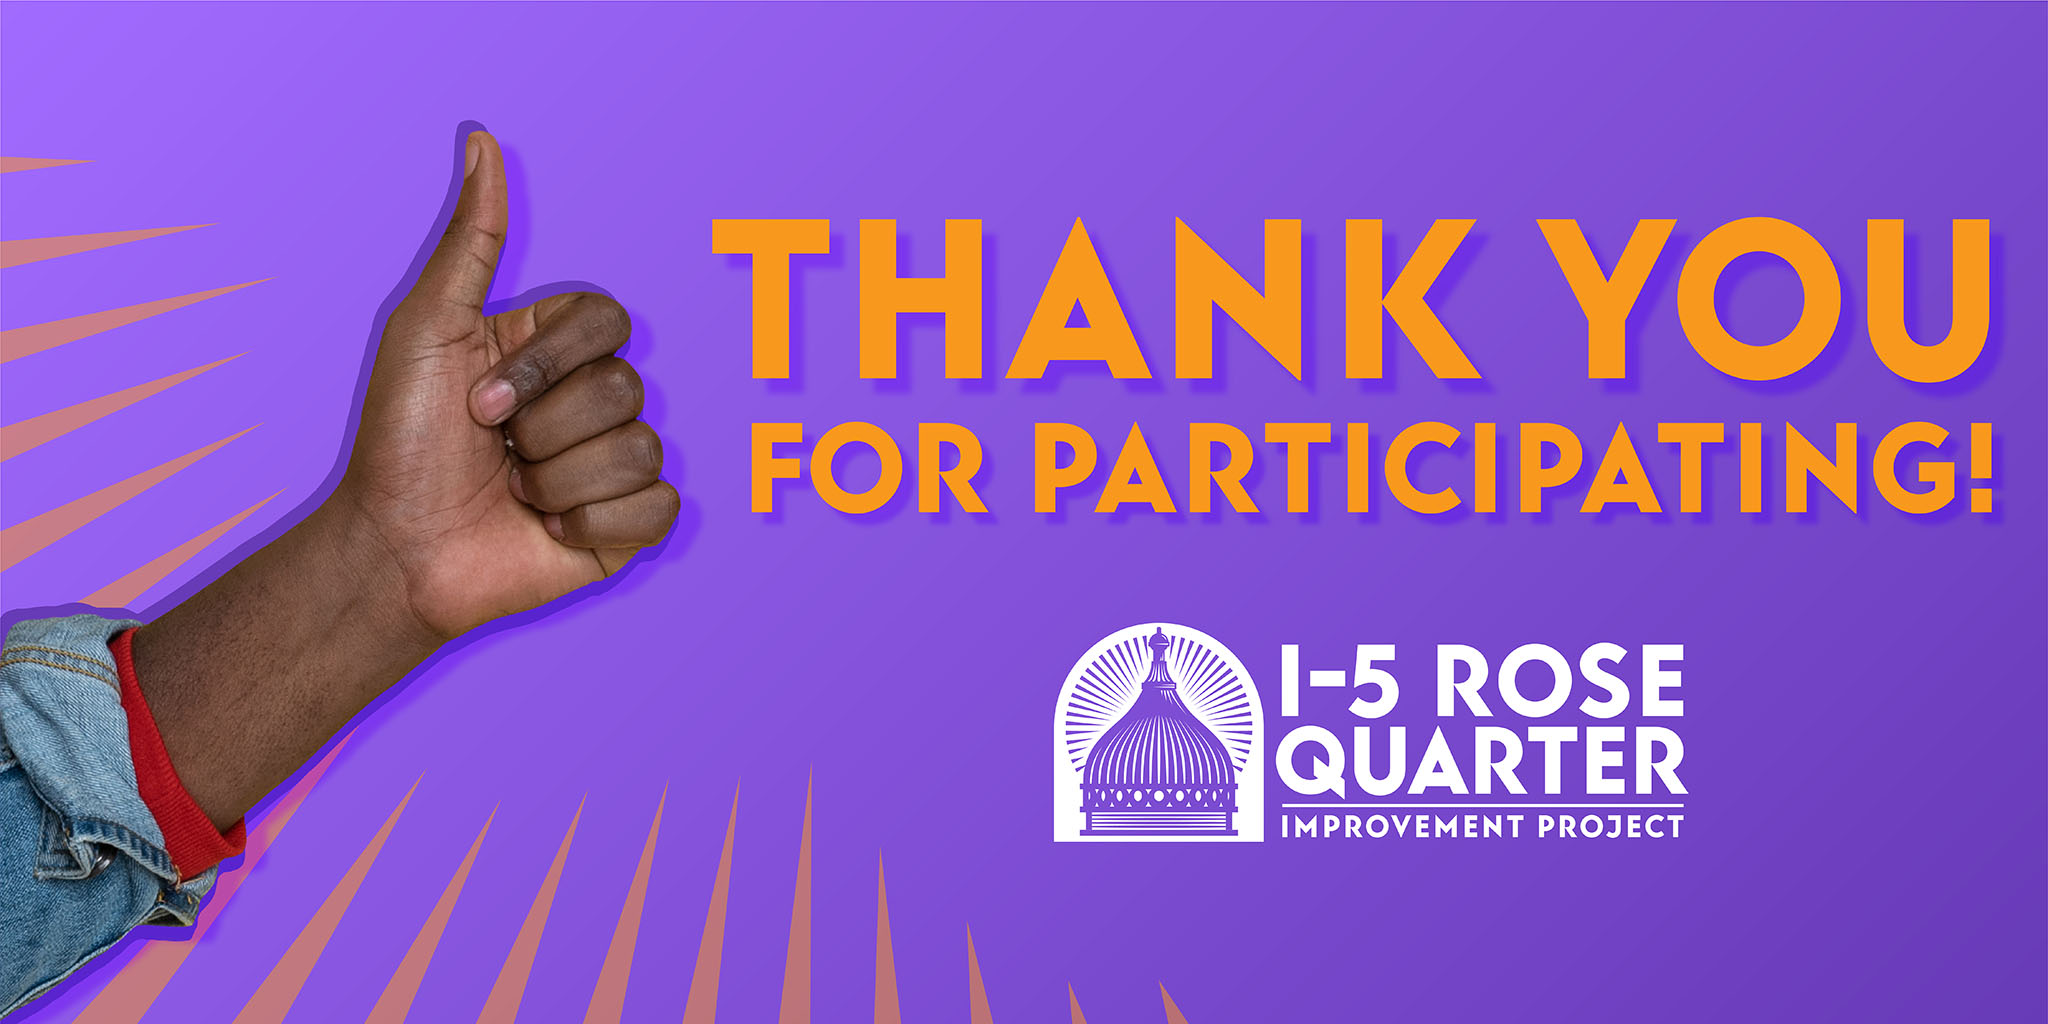 Thank you for participating in the I-5 Rose Quarter Improvement Project's environmental review process.